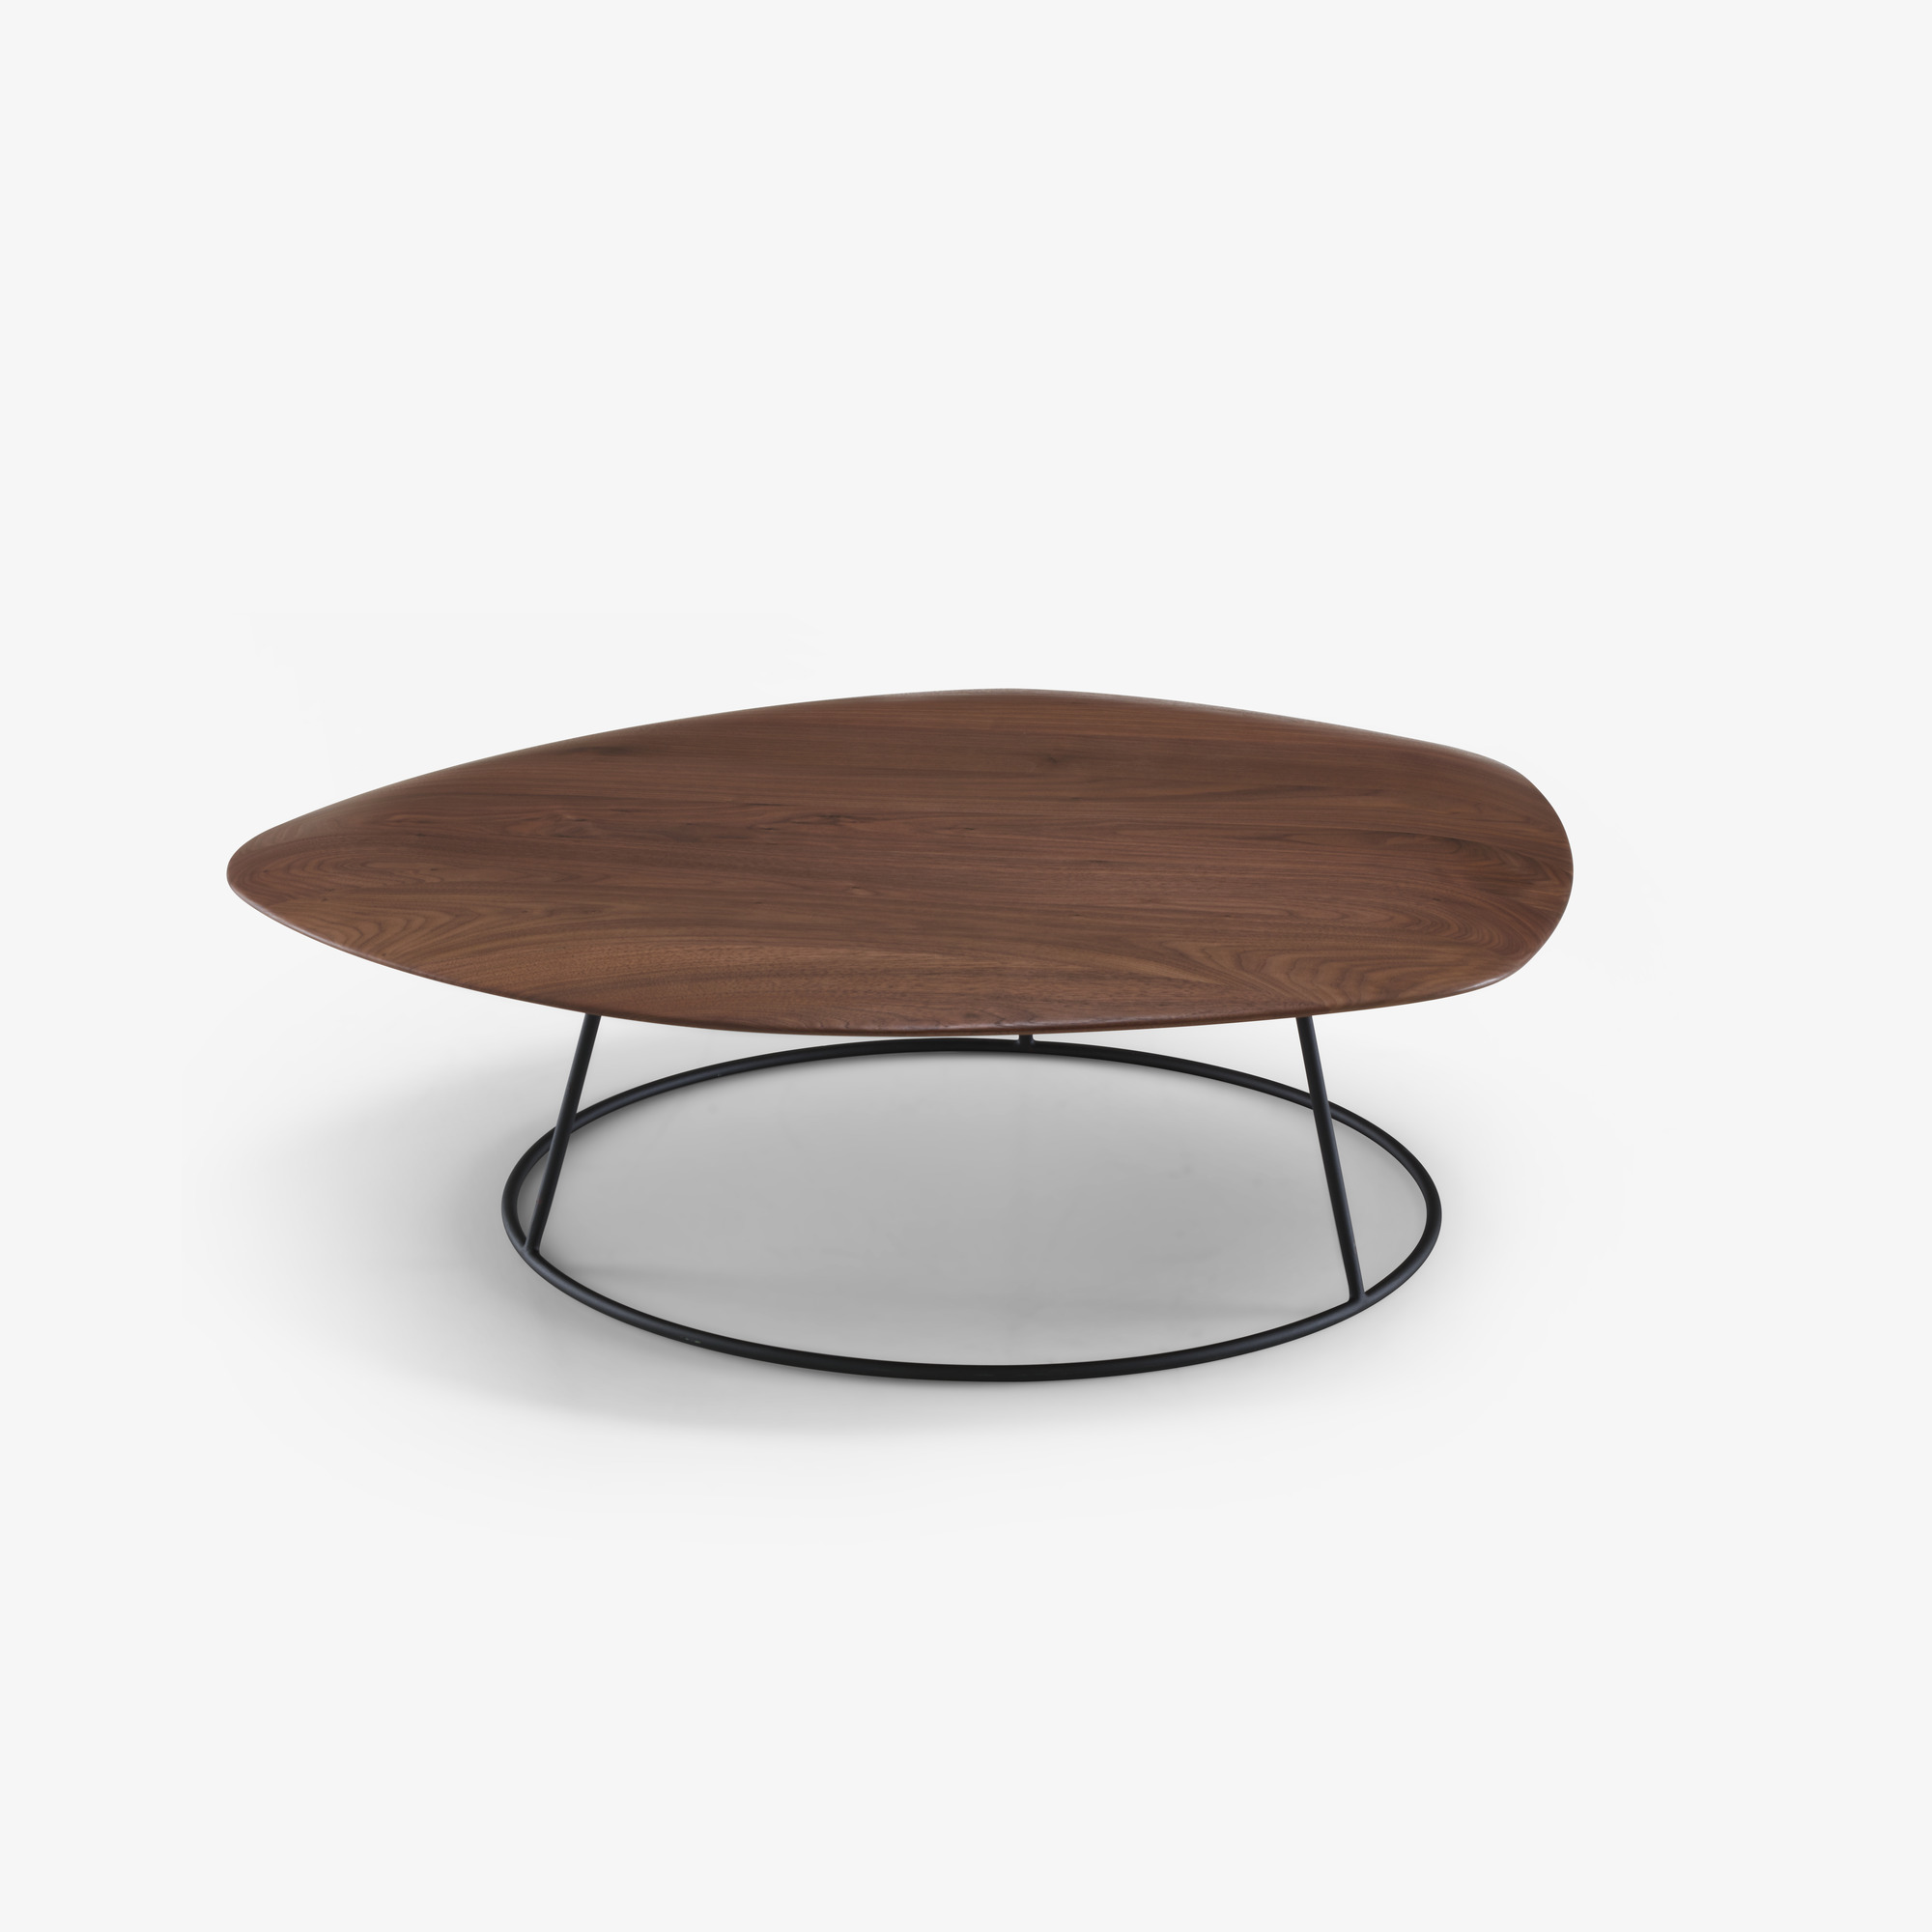 Image Low table convex top small 1